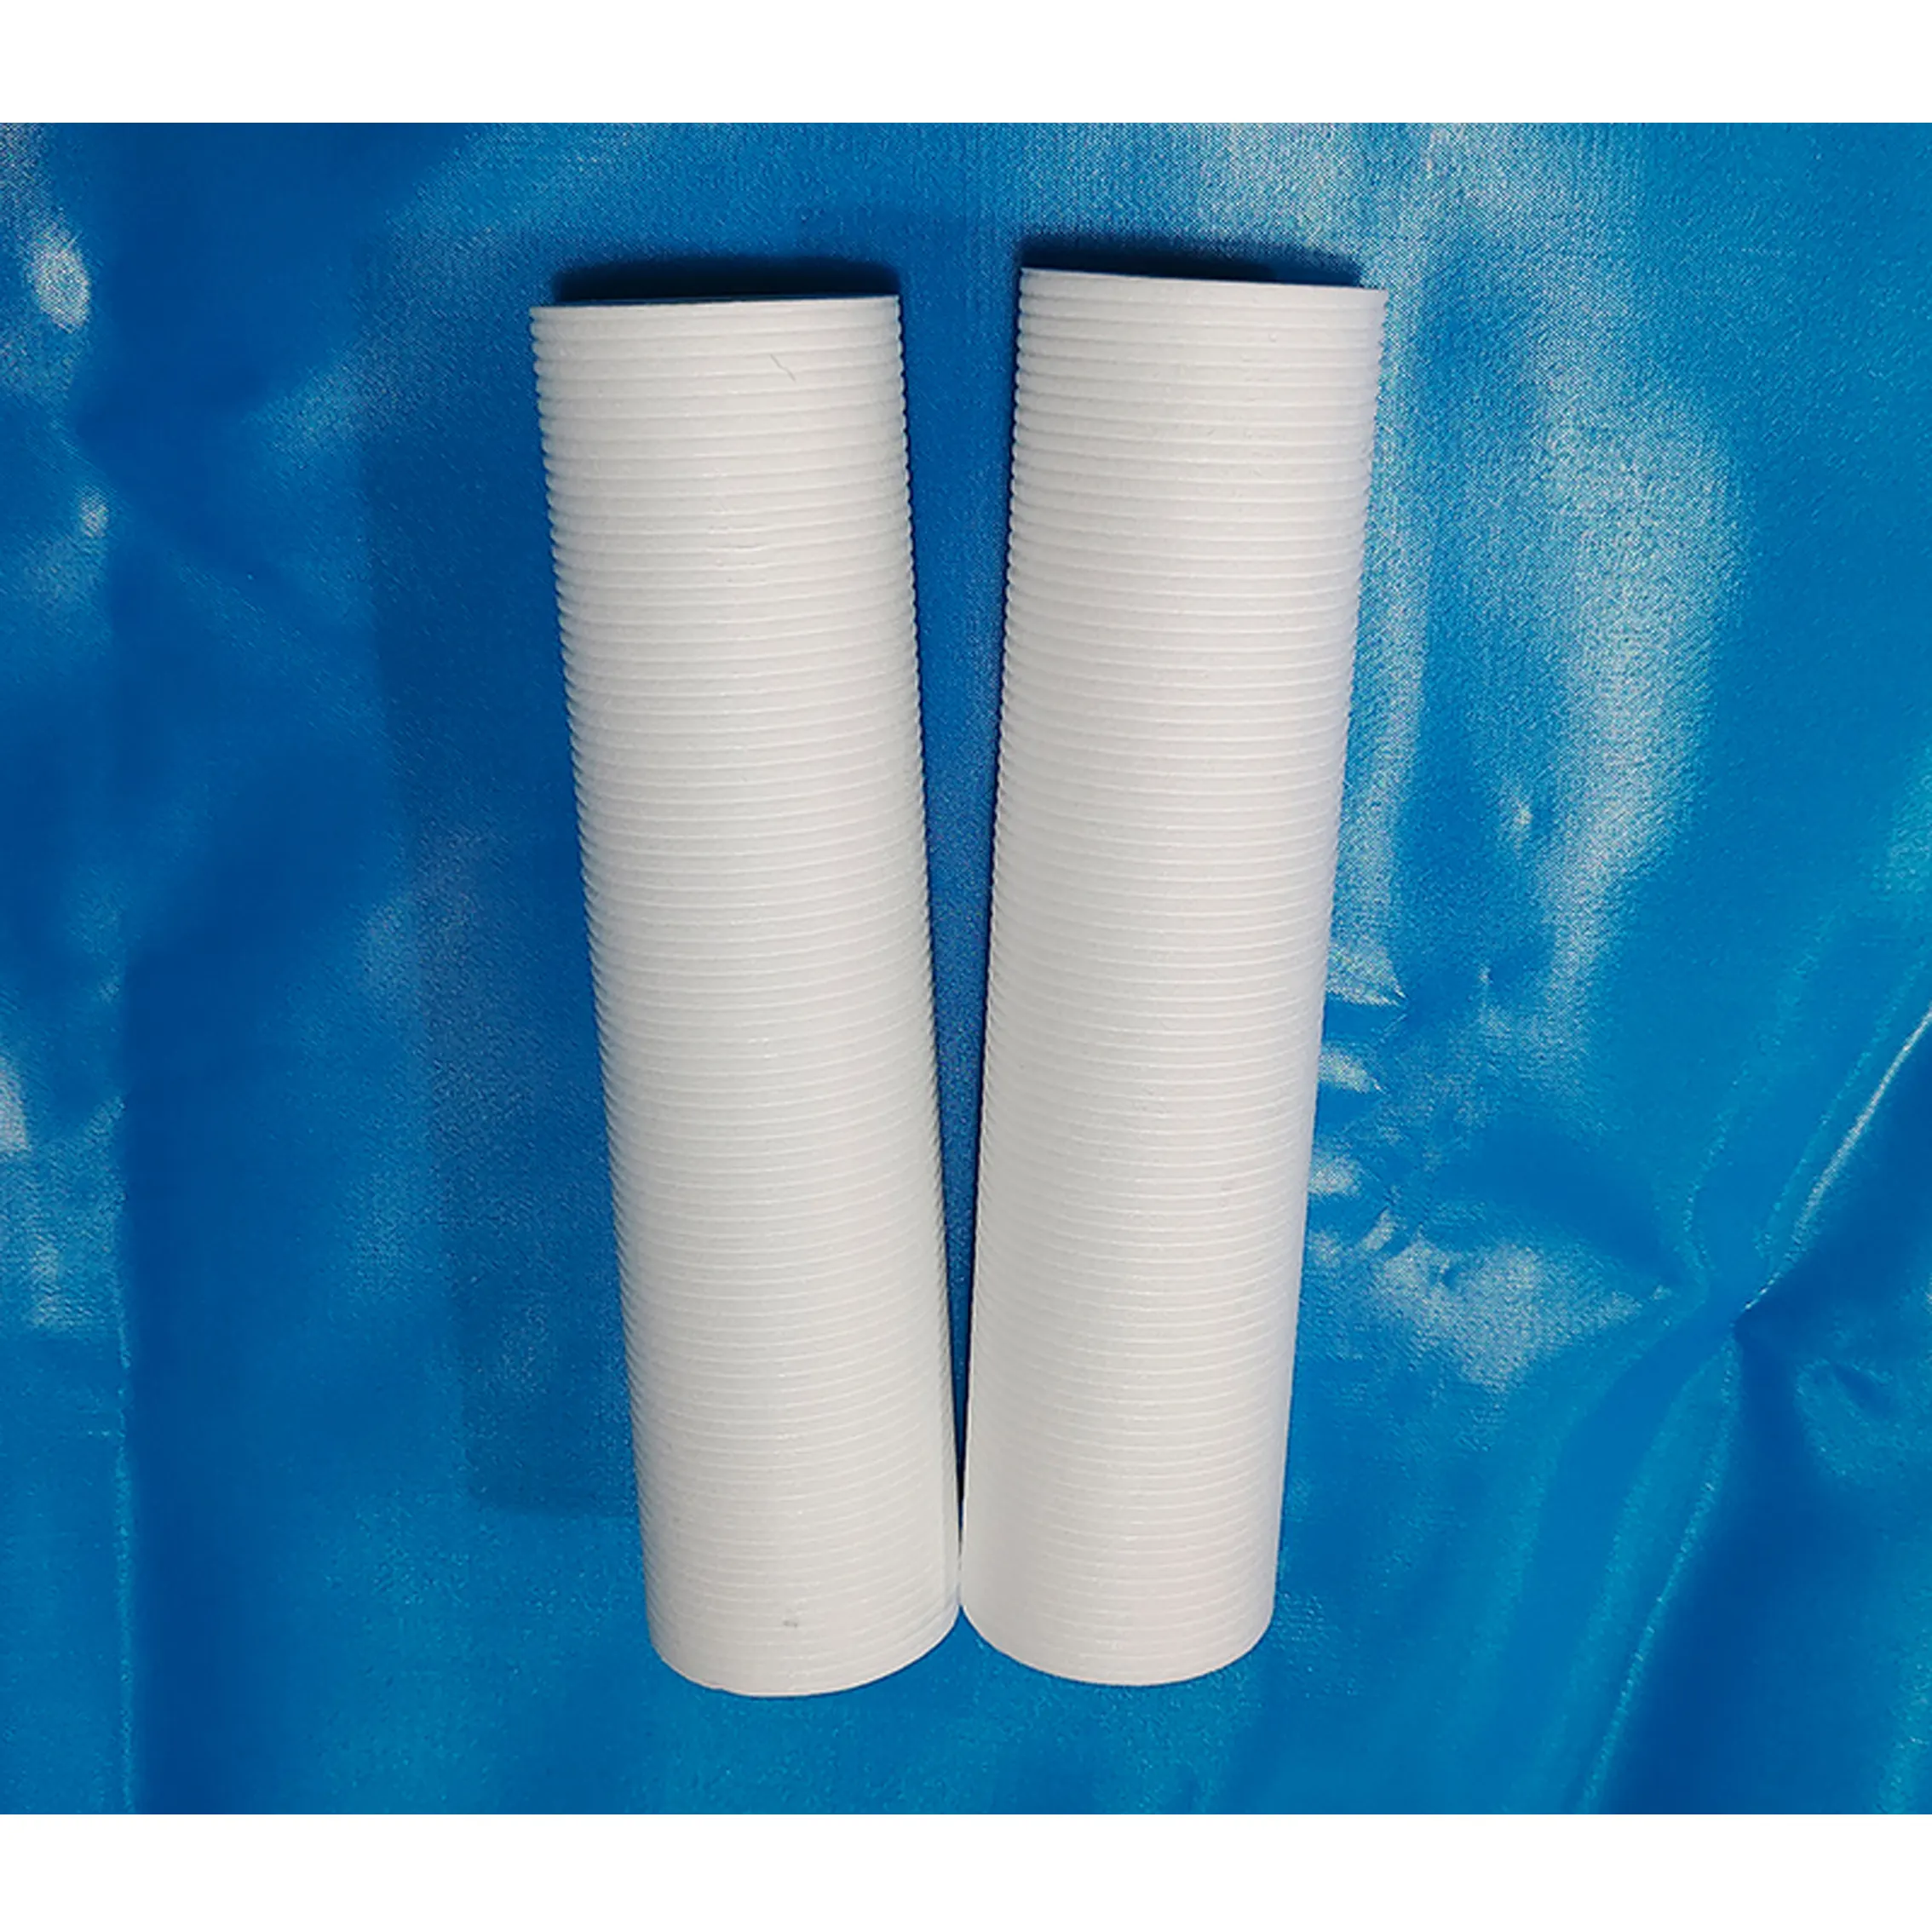 Zhilv Pp Cartridge Filter Polyester Antistatische Mesh Filter Cartridge Voor Water Filter